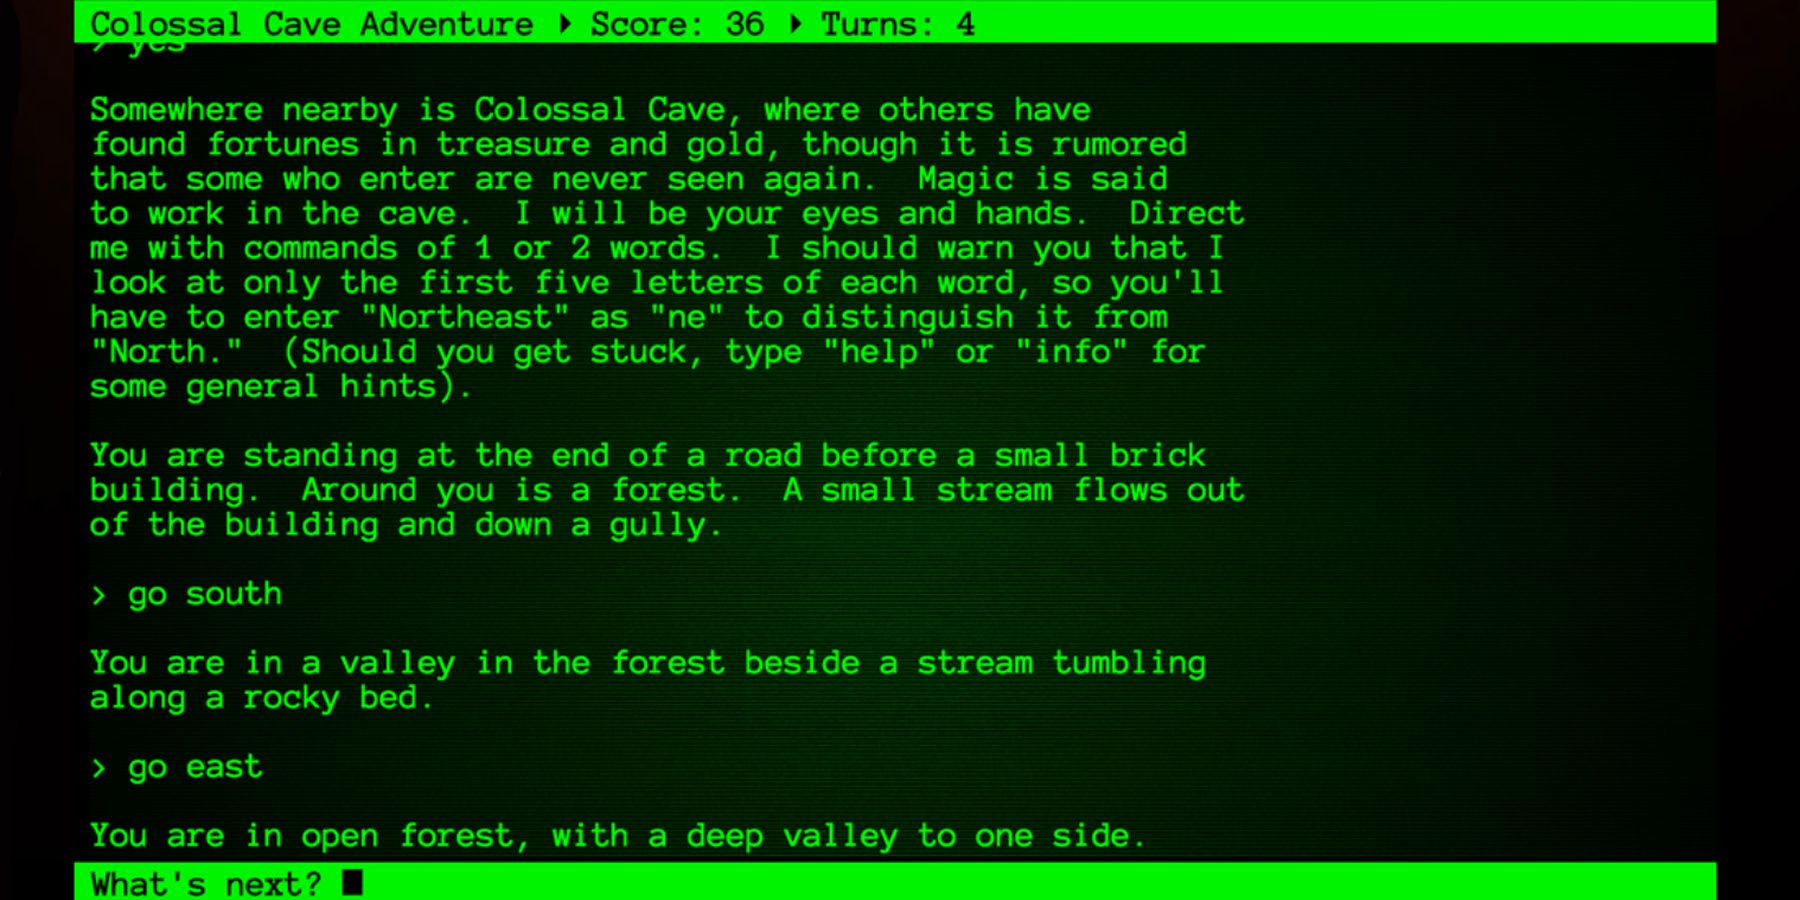 Colossal Cave Adventure text